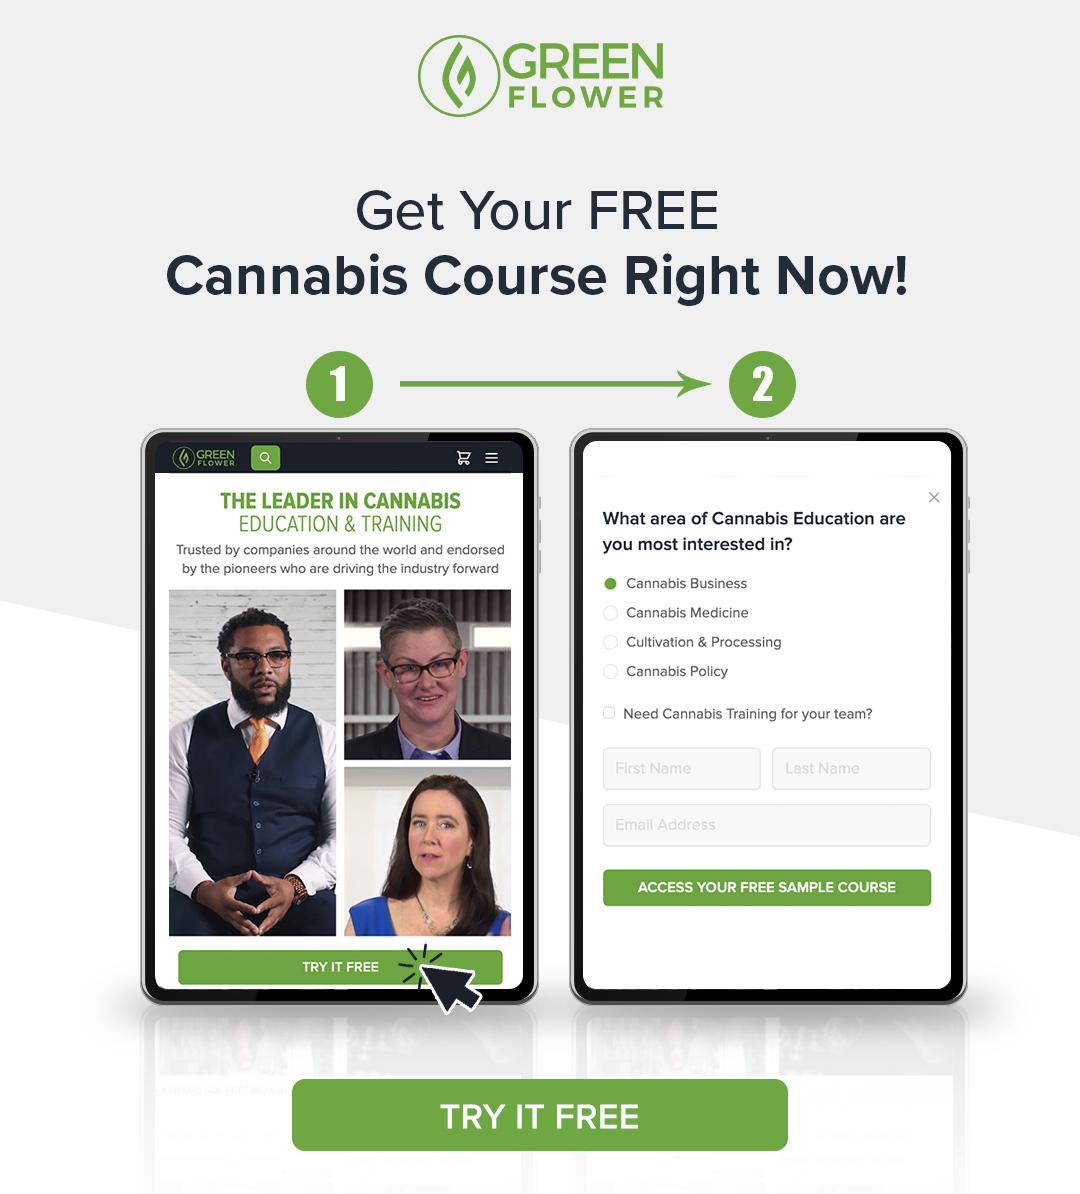 Get your free cannabis course right now